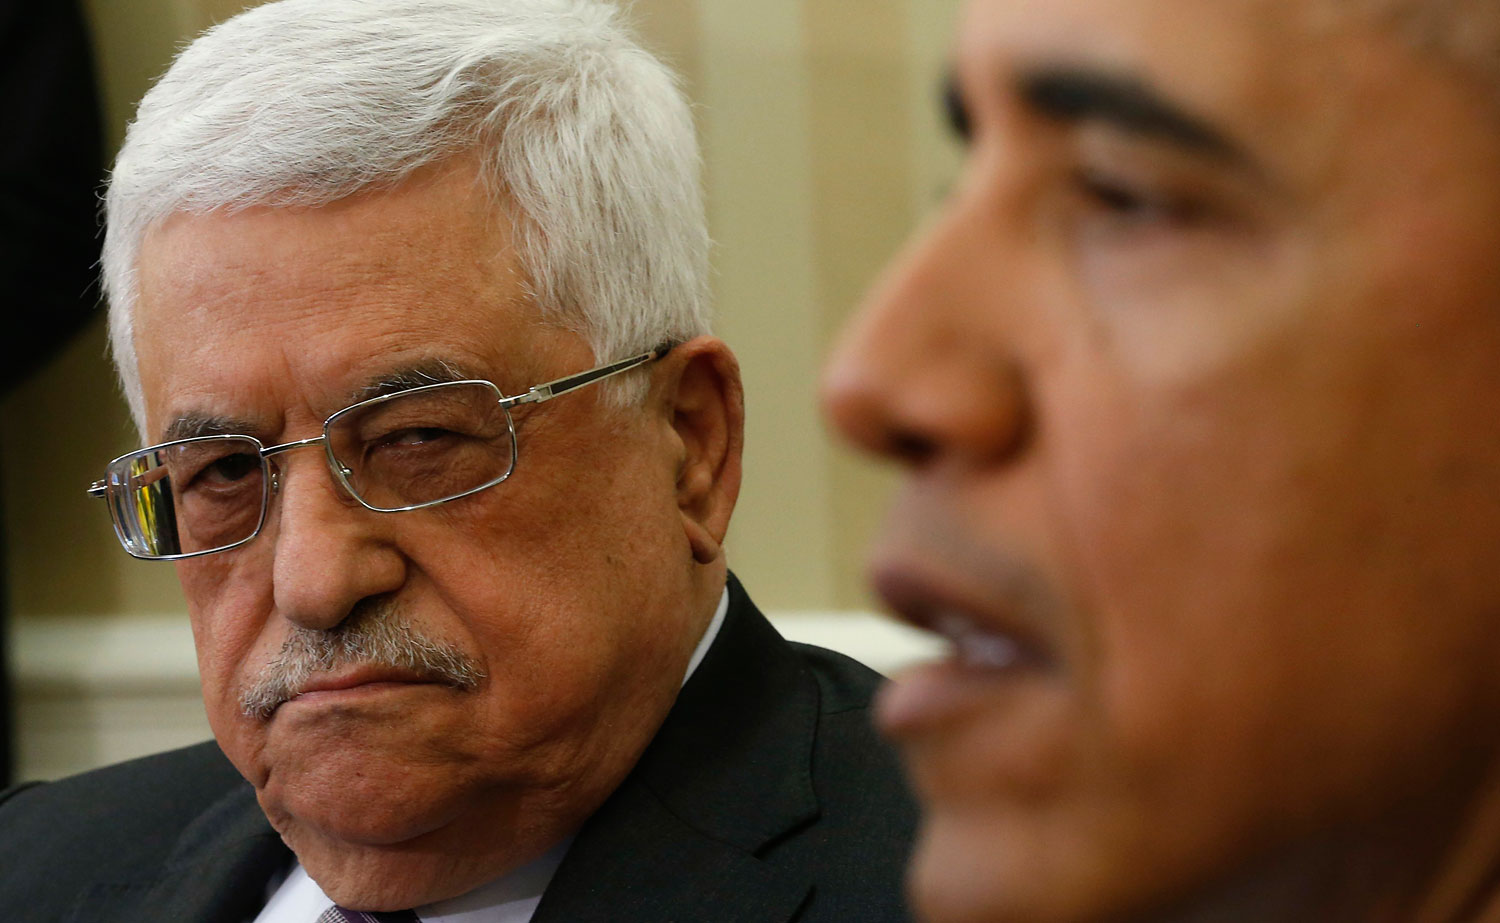 Palestinian Authority President Mahmoud Abbas meeting President Obama at the White House, March 17, 2014.